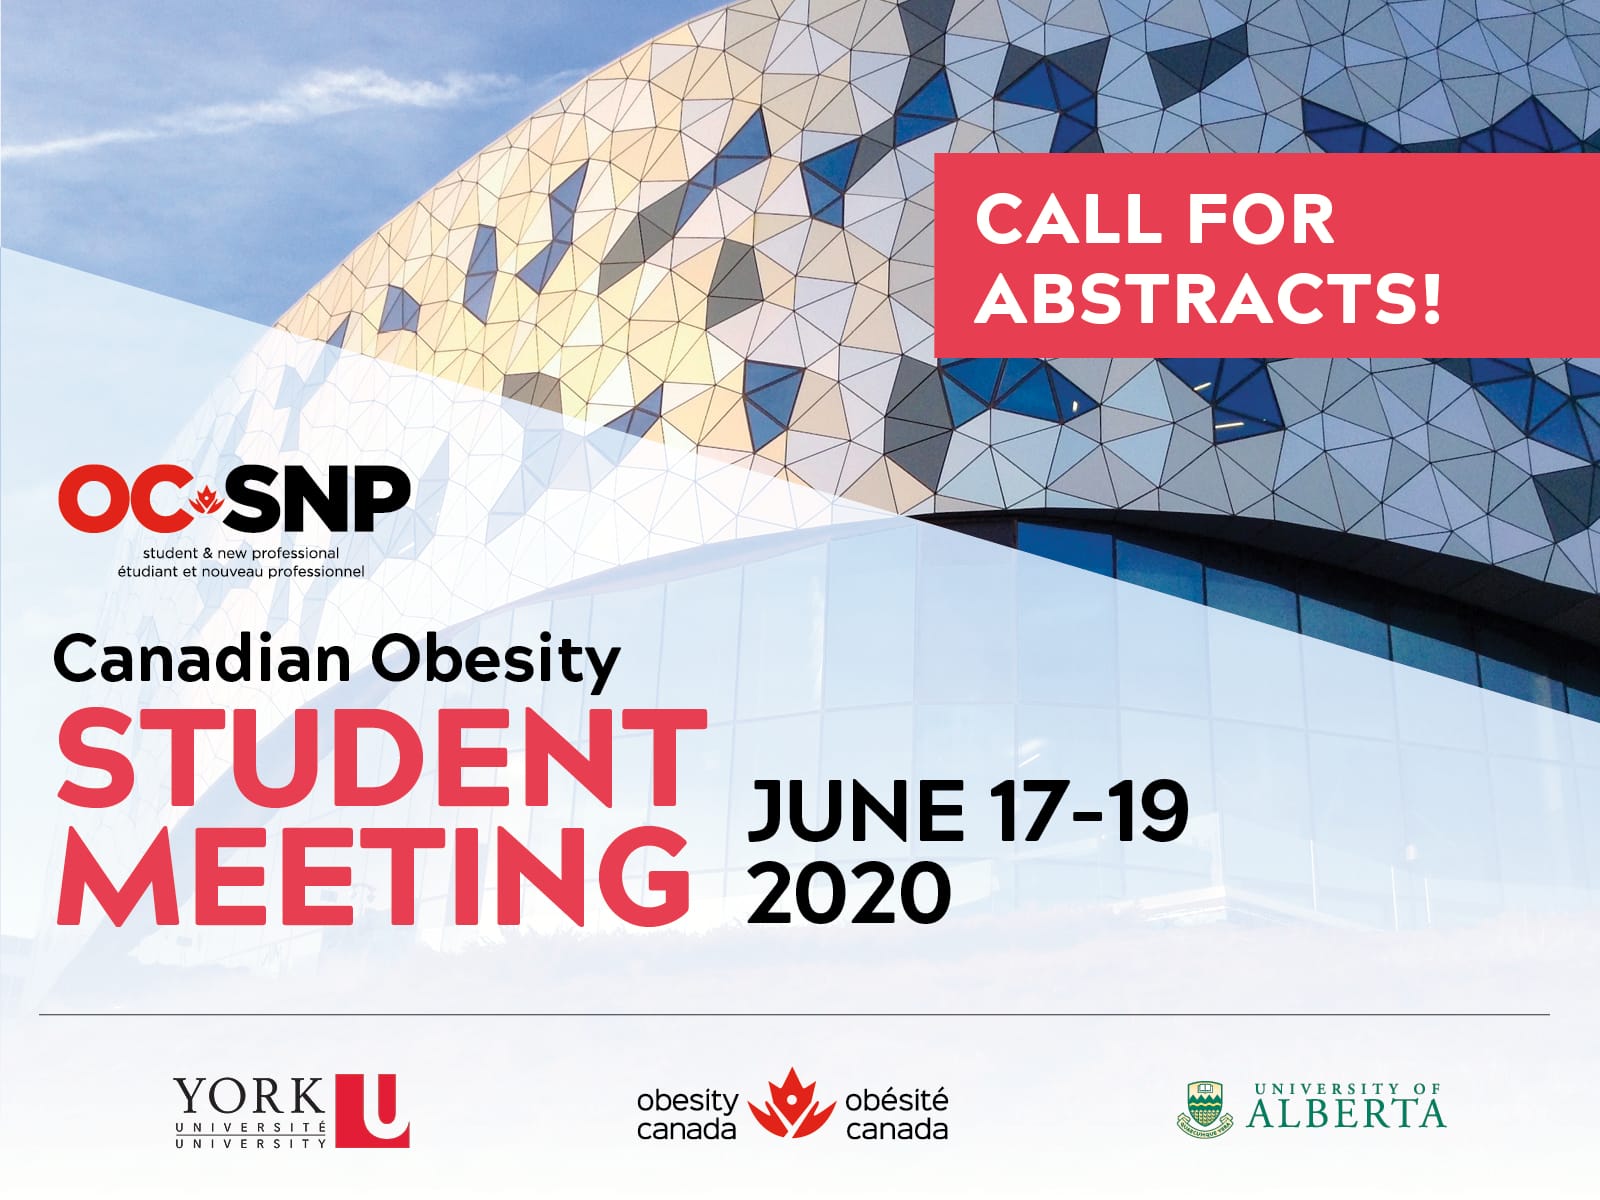 Promotional flyer for the 2020 canadian obesity student meeting, june 17-19, featuring the abstract geometric facade of a modern building, with event details and logos of participating institutions.